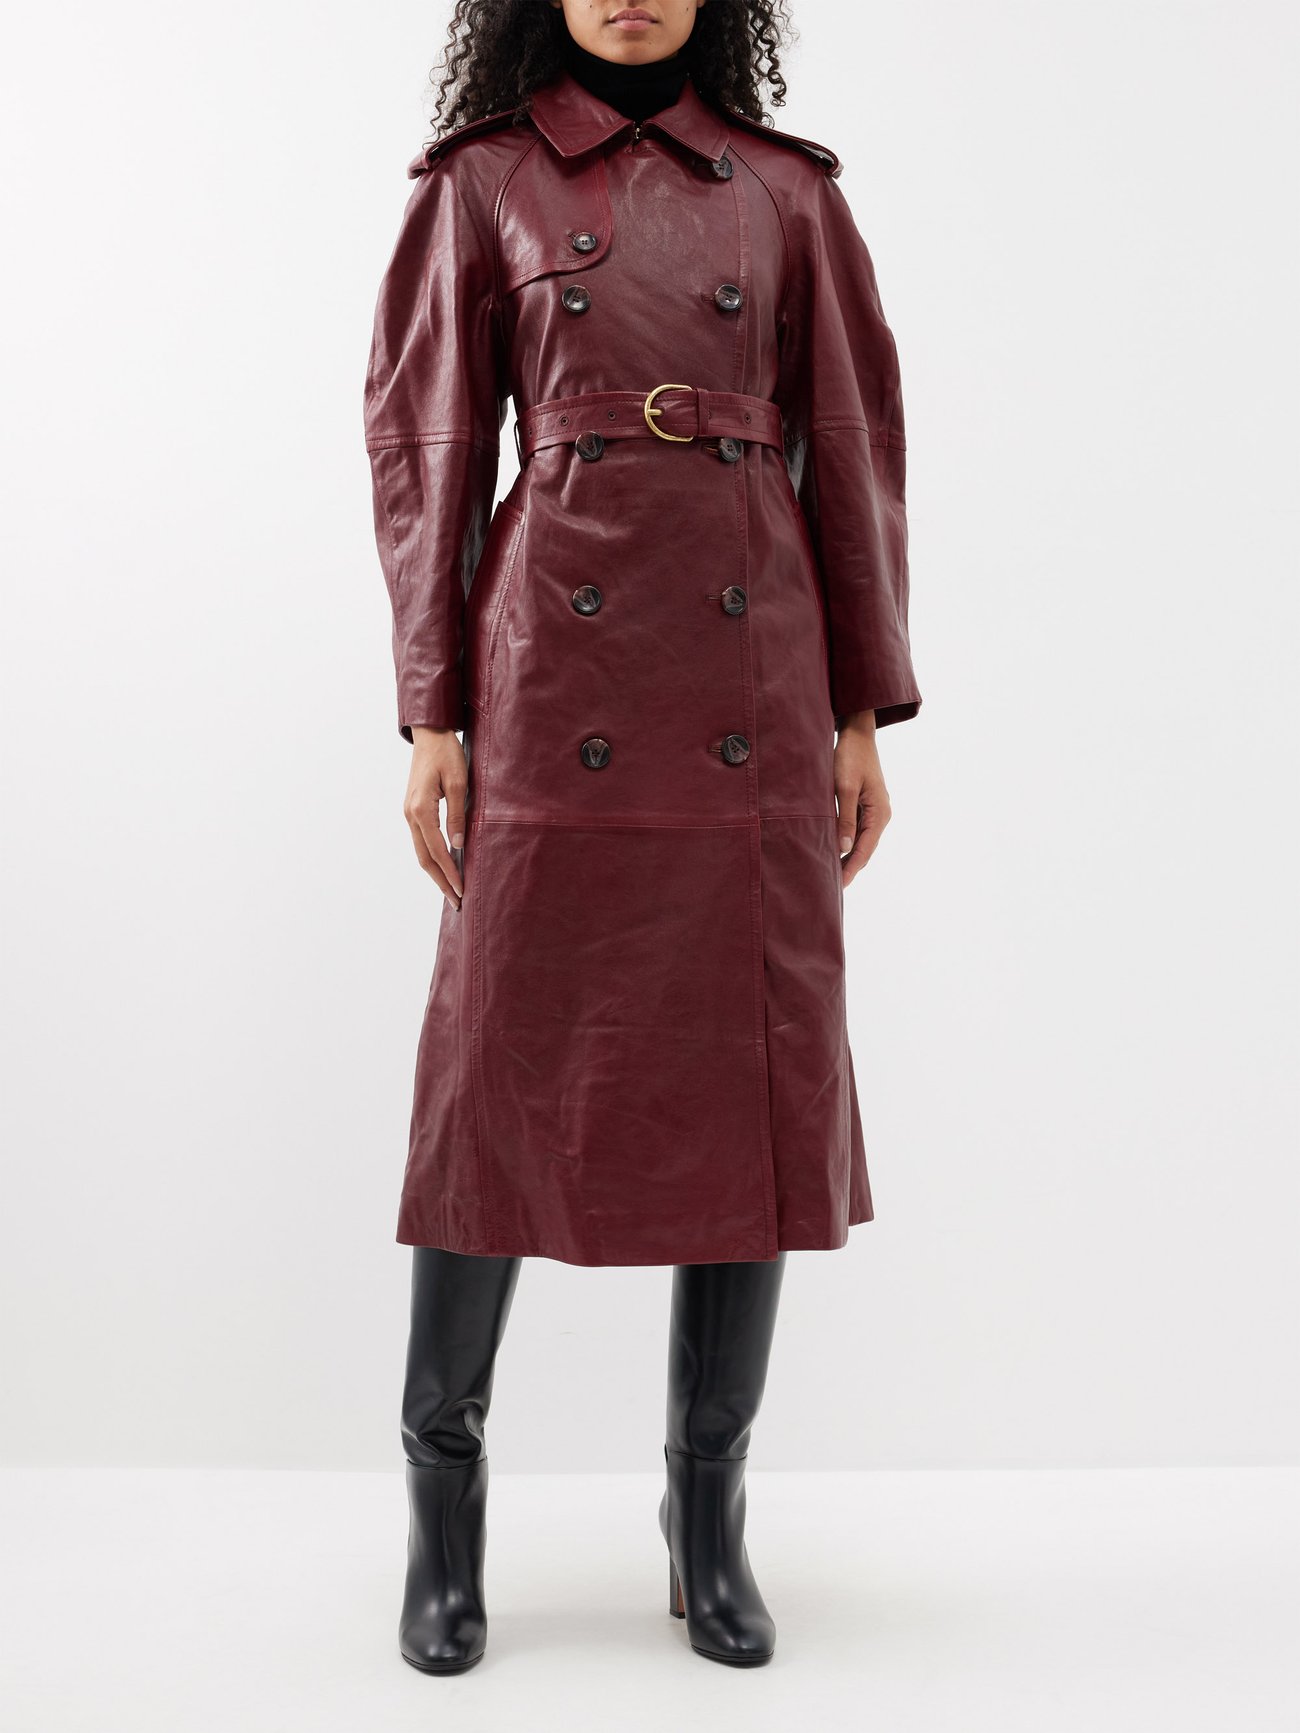 Exude bohemian cool with Ulla Johnson's burgundy Marlowe trench coat, tailored from butter-soft nappa leather with a lightly waxed finish.